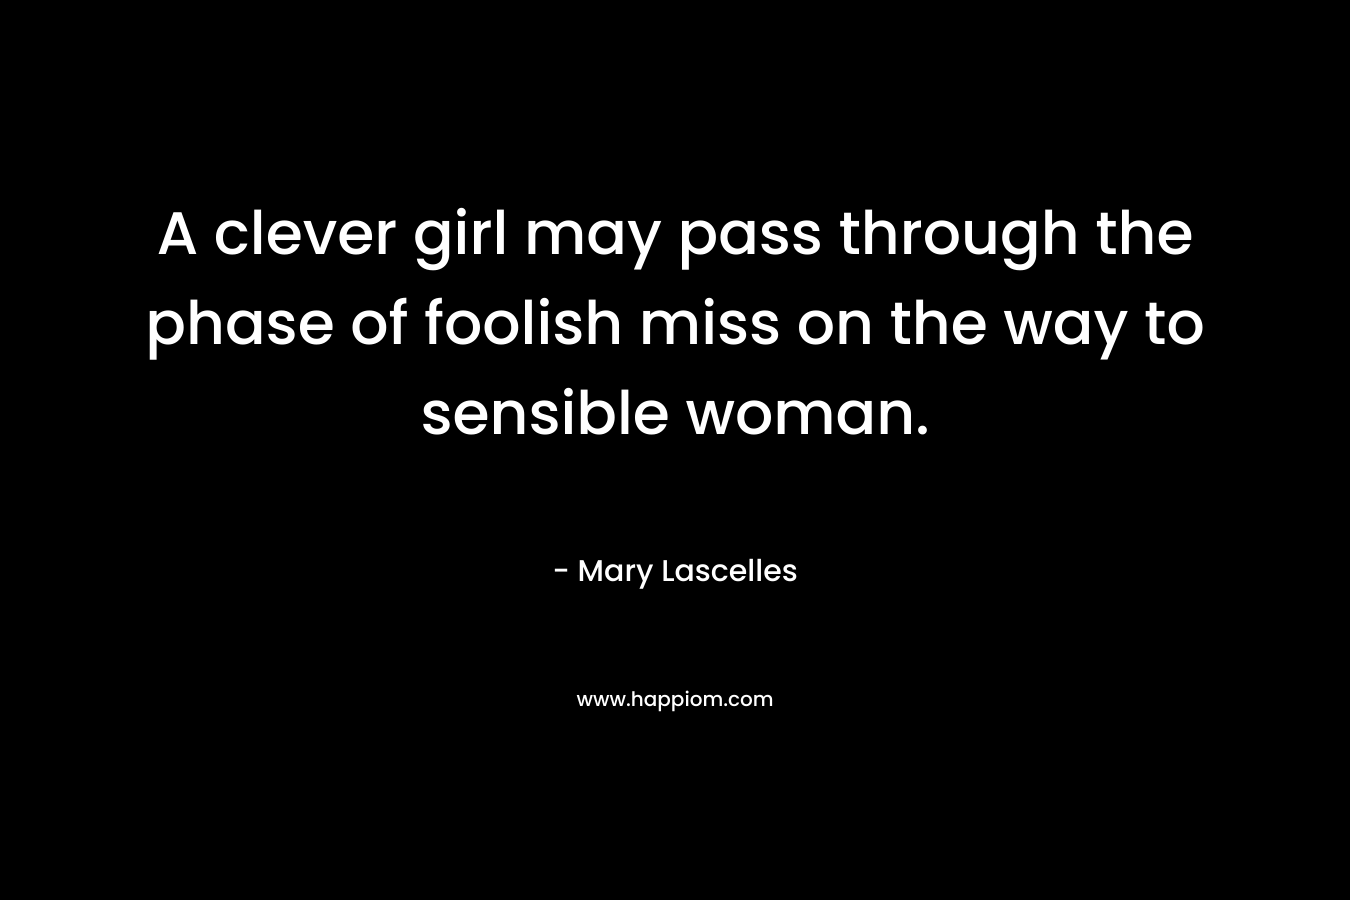 A clever girl may pass through the phase of foolish miss on the way to sensible woman.